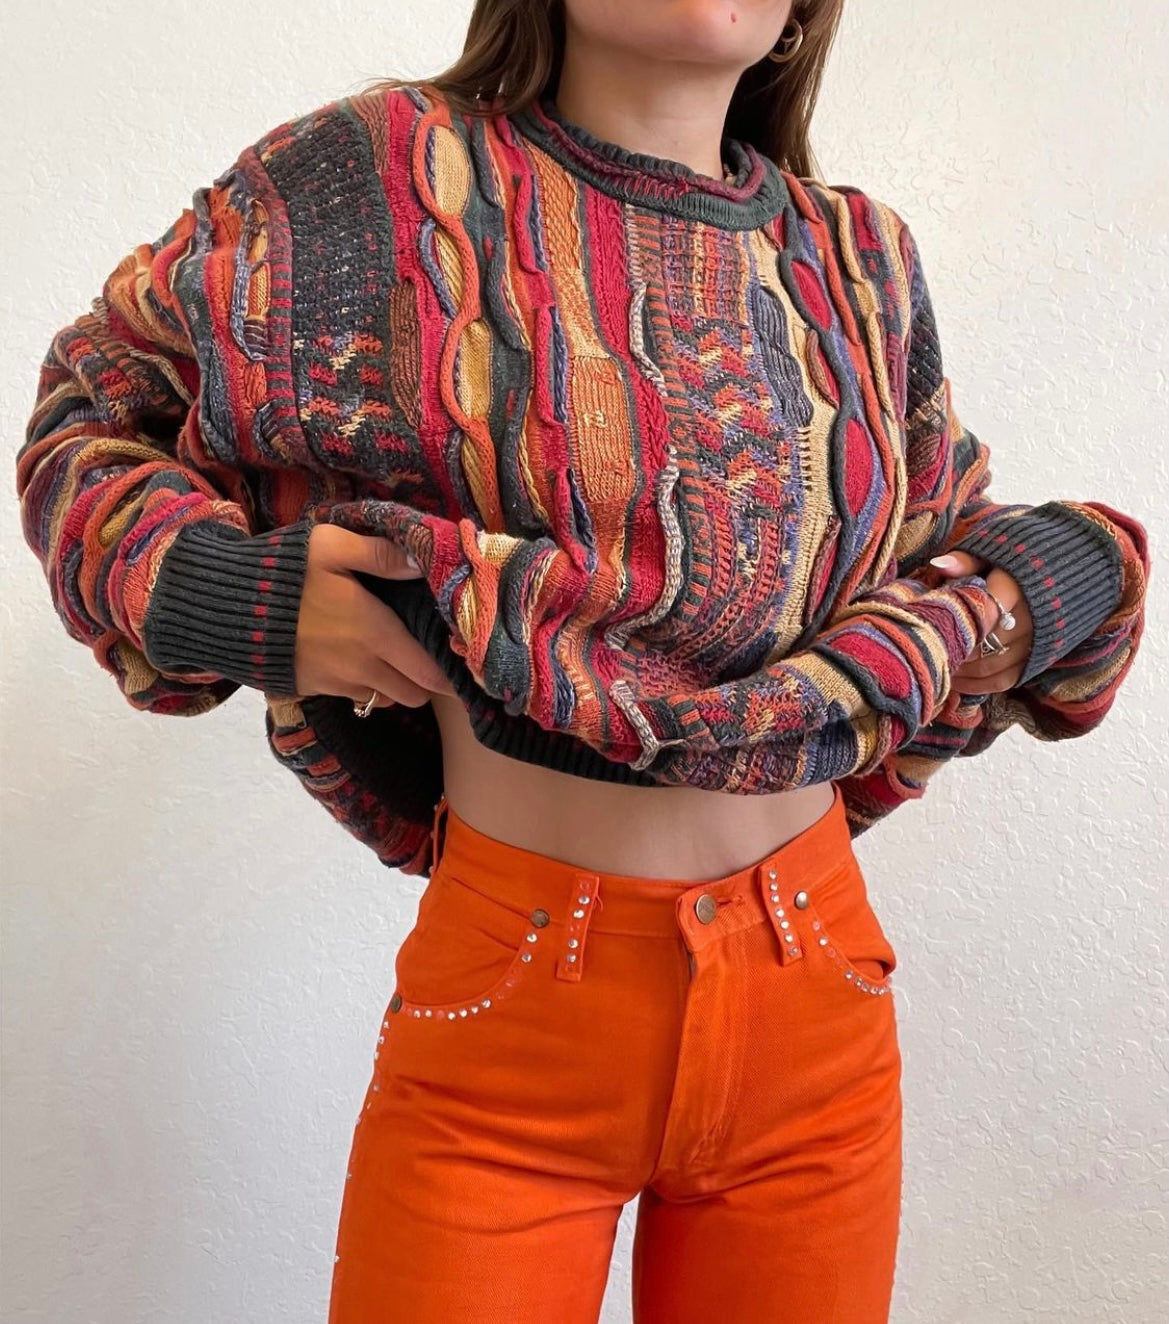 A model wearing a vintage coogi sweater with orange, red, yellow, and gray detailing. The model is also wearing vintage orange wranglers pants.